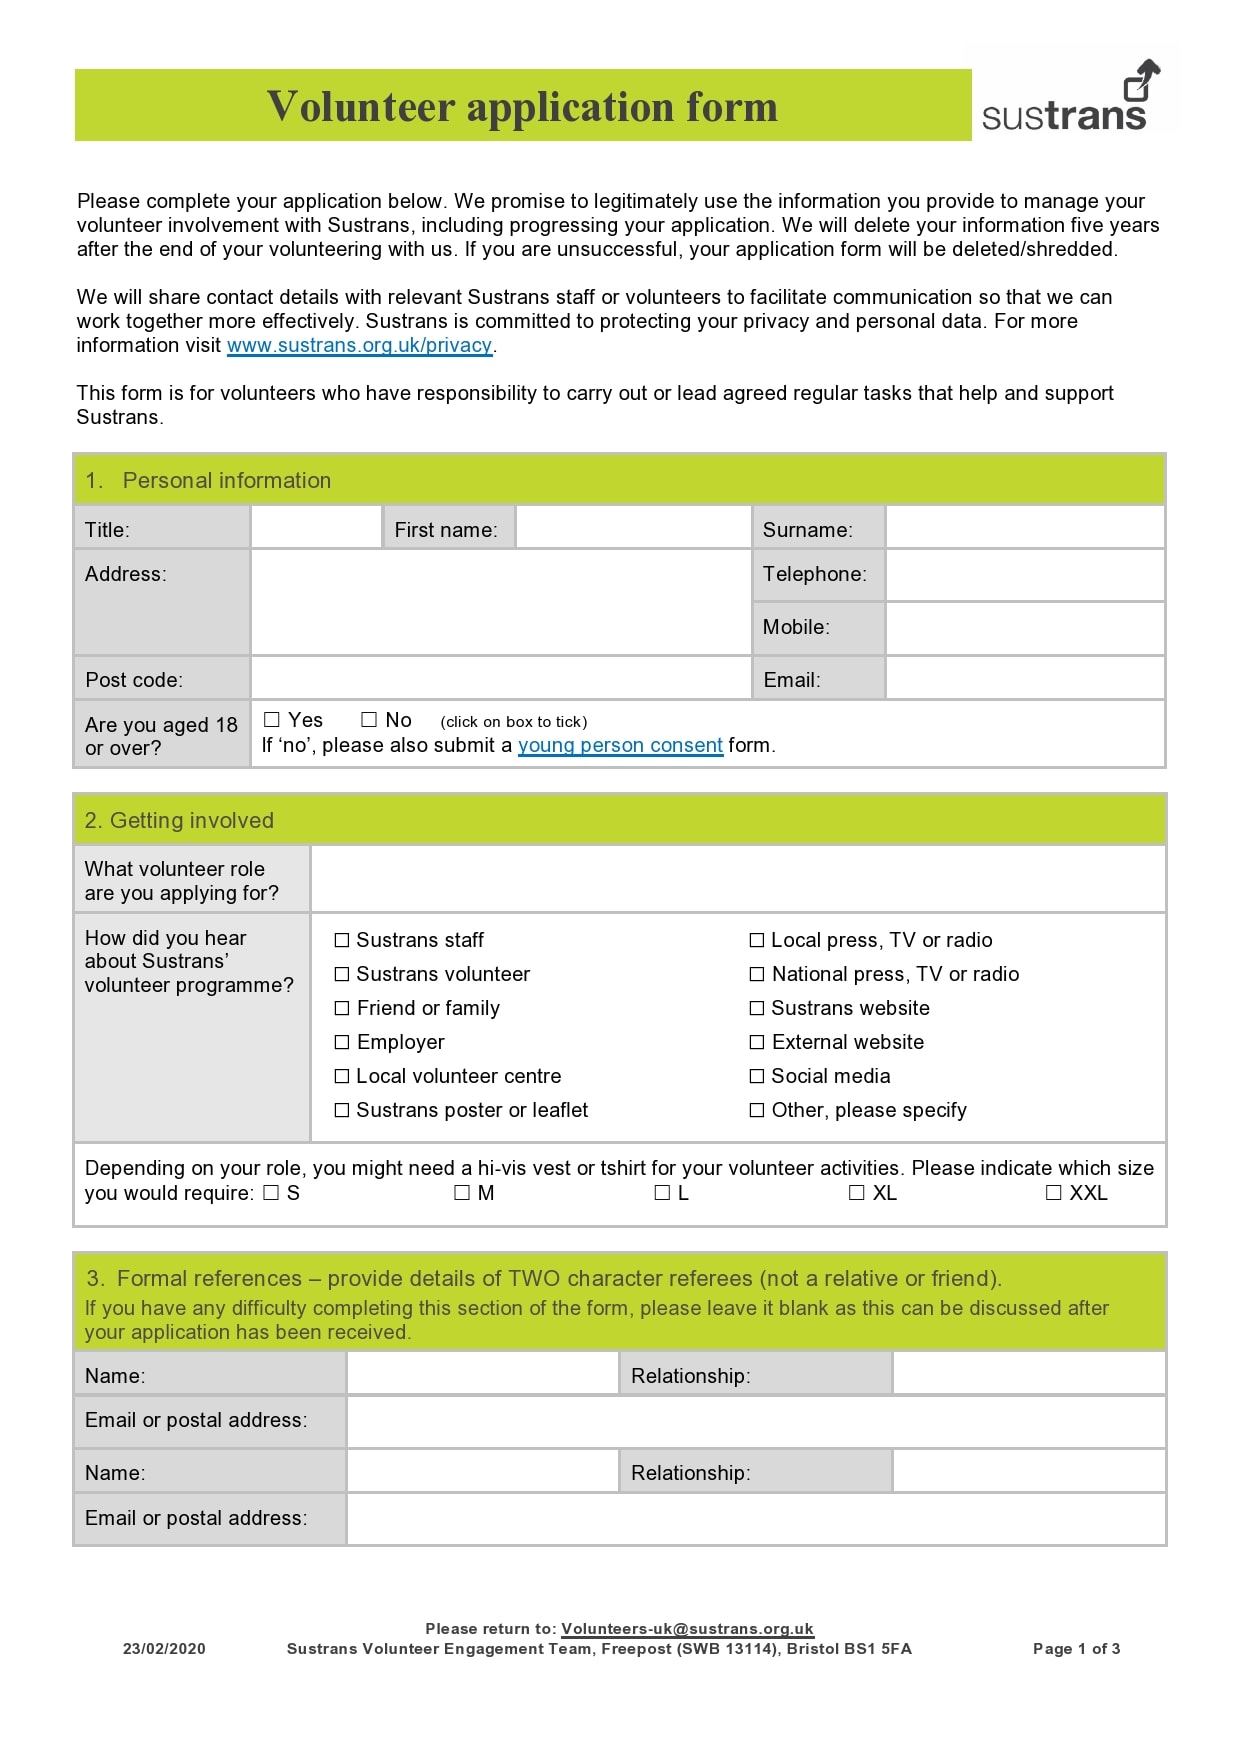 Free downloadable templates to volunteer forms mevaislamic